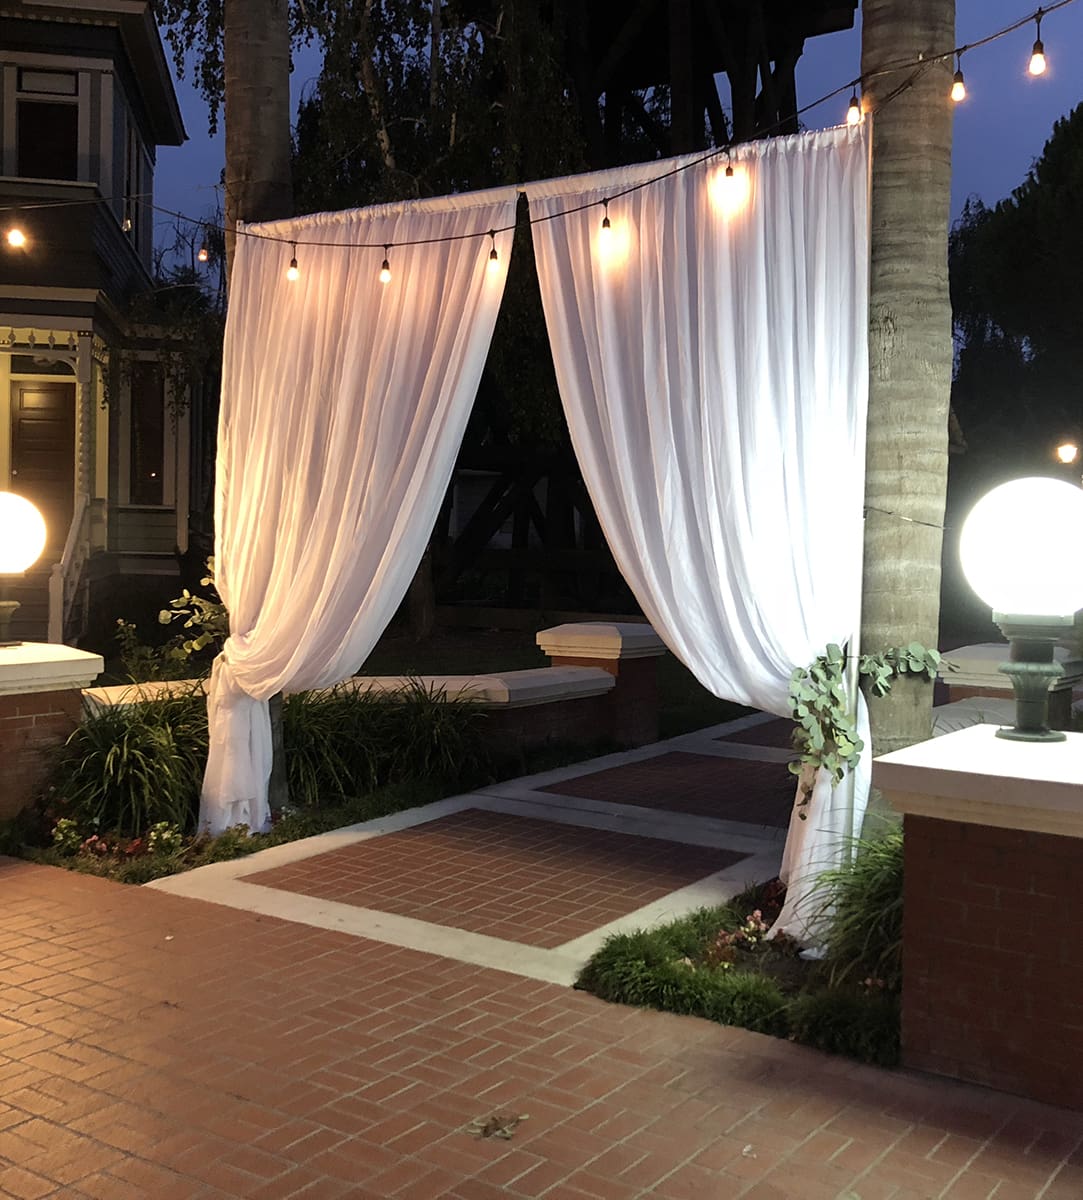 White curtains draped between two palm trees at Heritage Square, Oxnard, lit by soft globe lights, creating an inviting entryway.